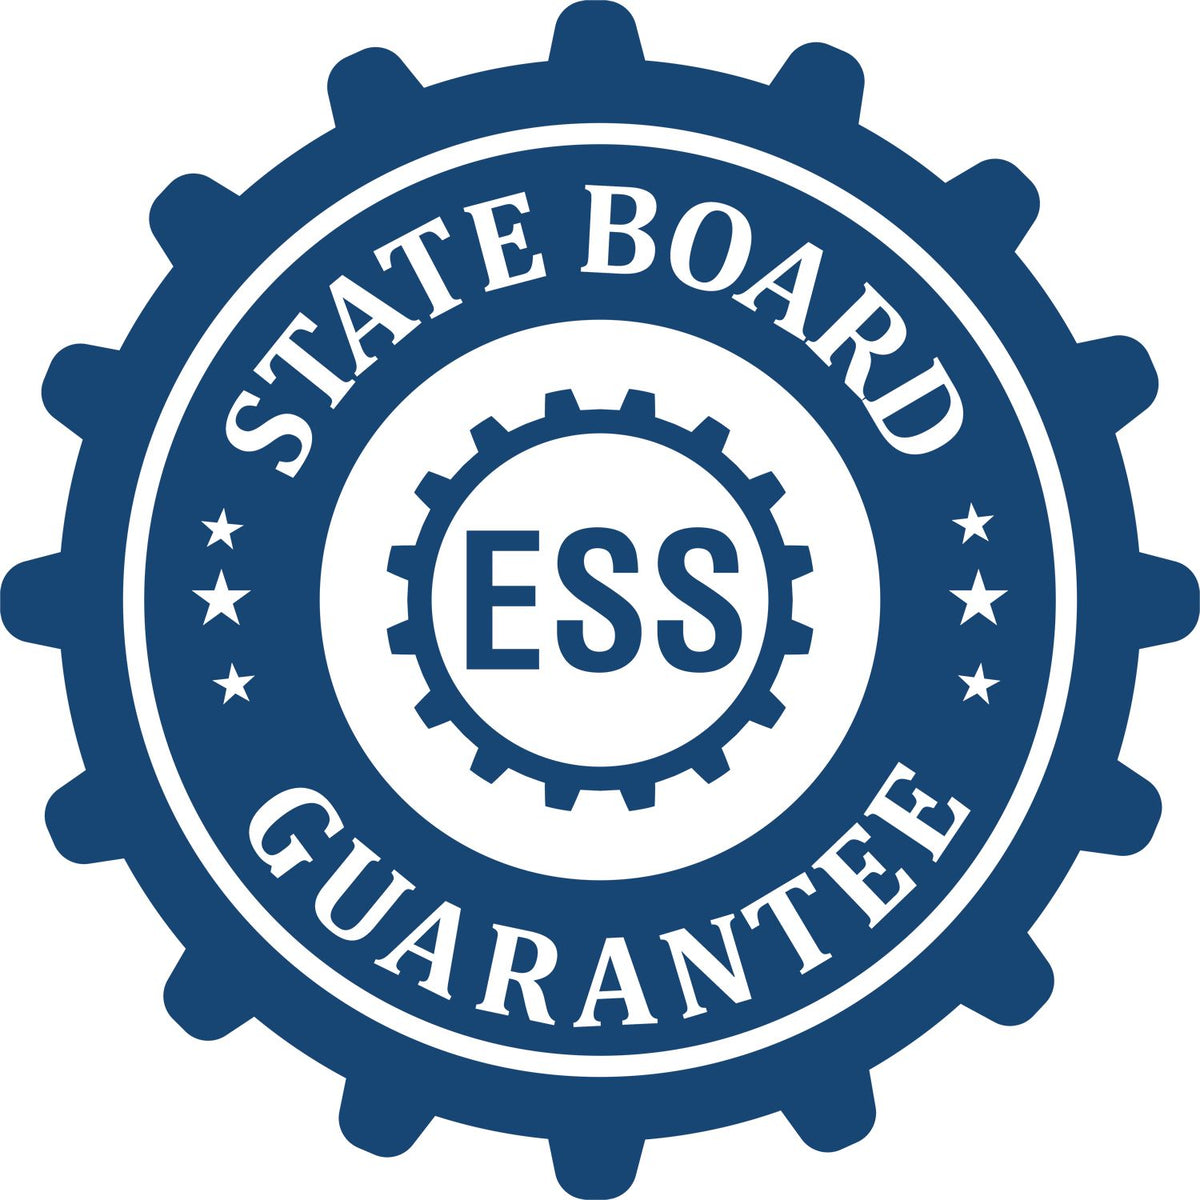 An emblem in a gear shape illustrating a state board guarantee for the Maryland Desk Surveyor Seal Embosser product.